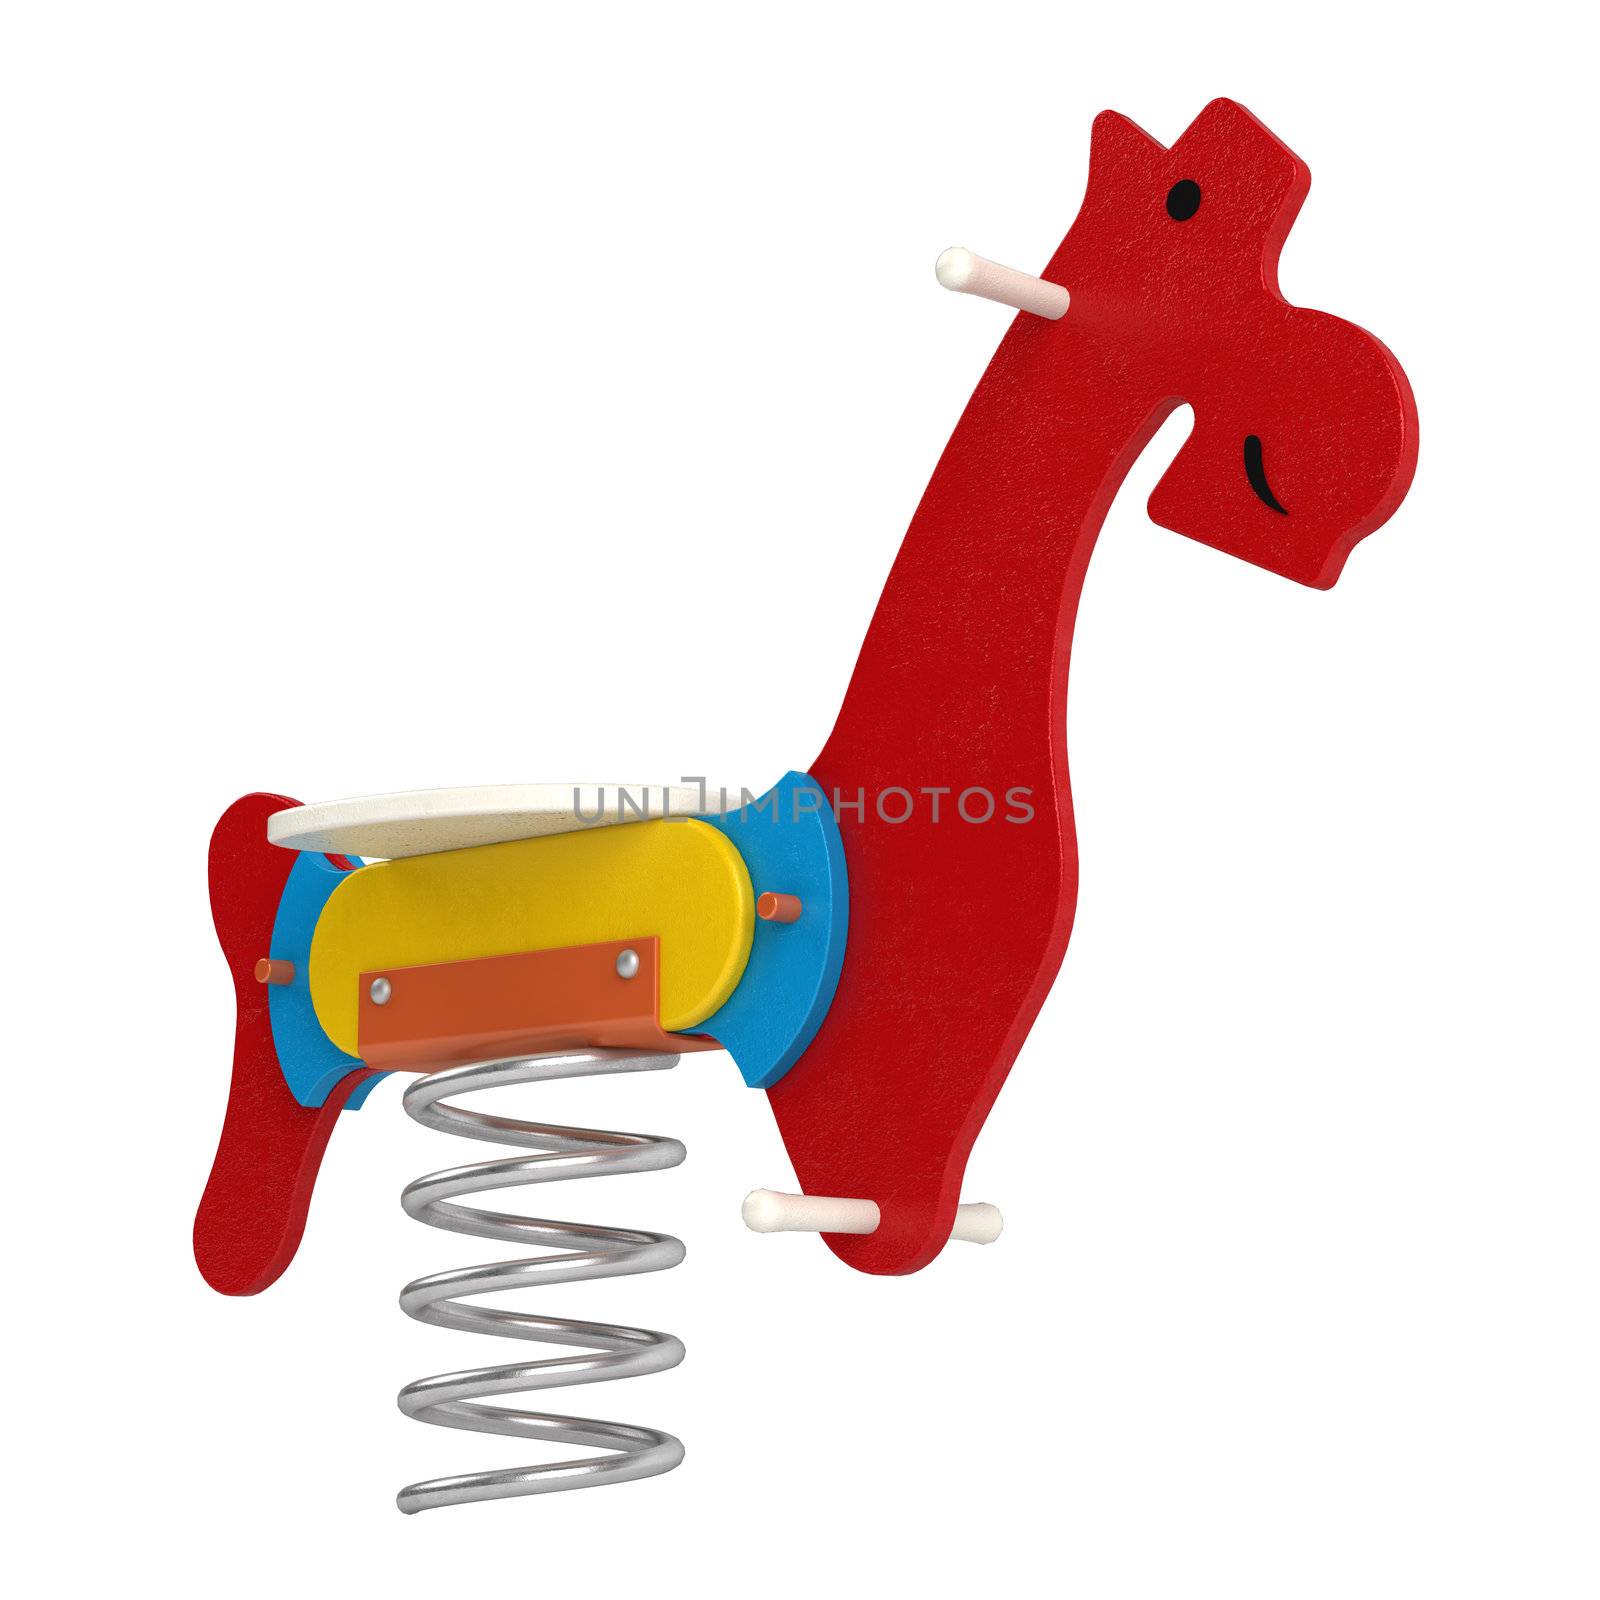 Colourful toy jumping horse with a seat for a child above a saddle and a large metal spring underneath for bounce and fun isolated on white